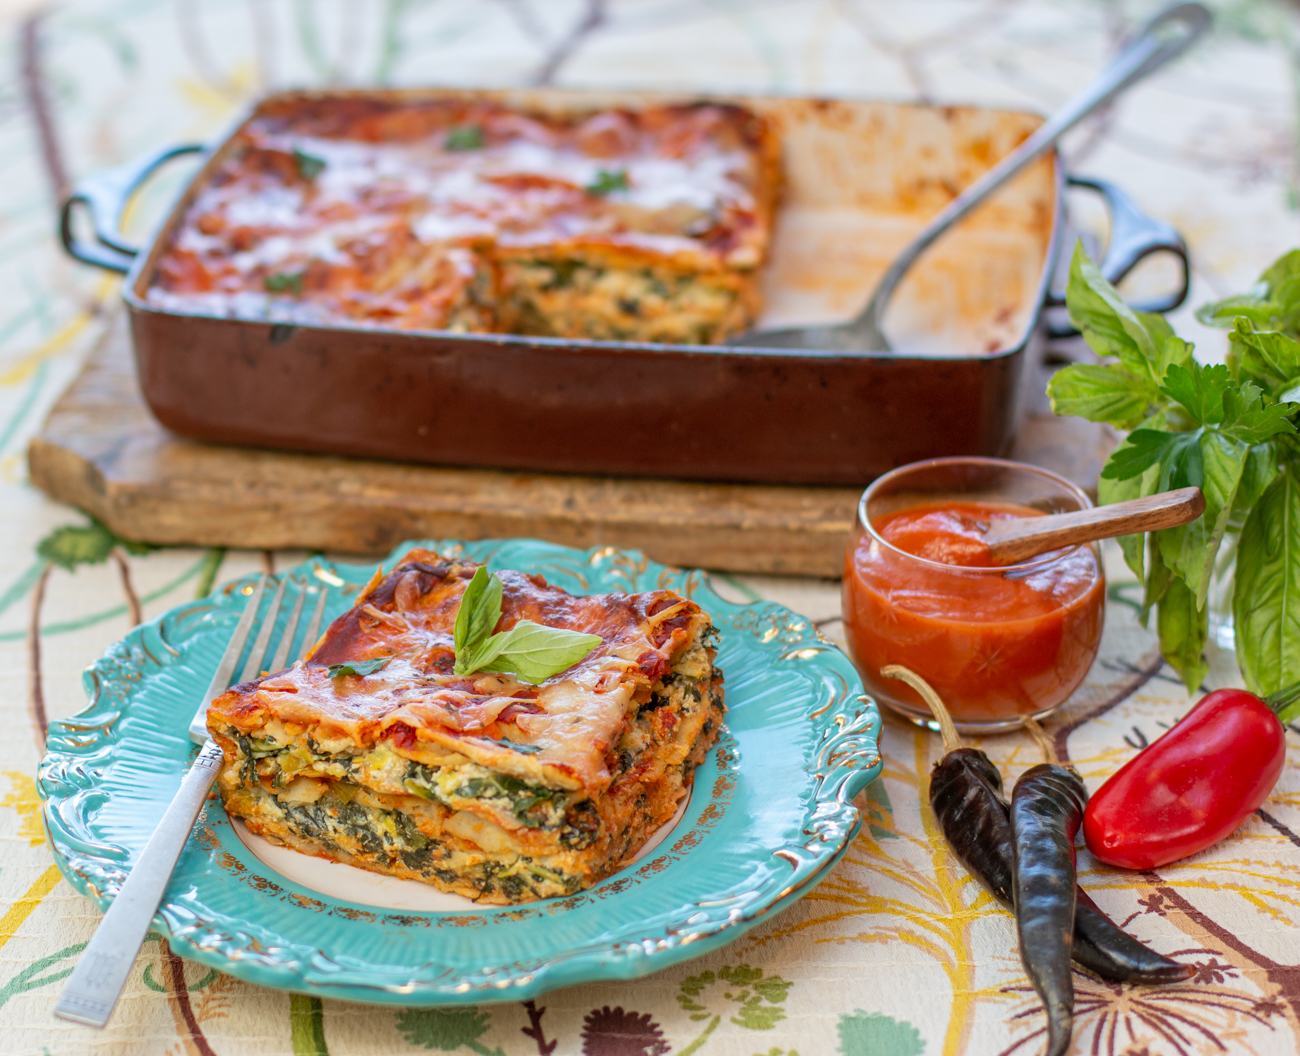 Gluten Free Corn Tortilla “Lasagne” with Green Veggies and Roasted Red Pepper Chili Sauce